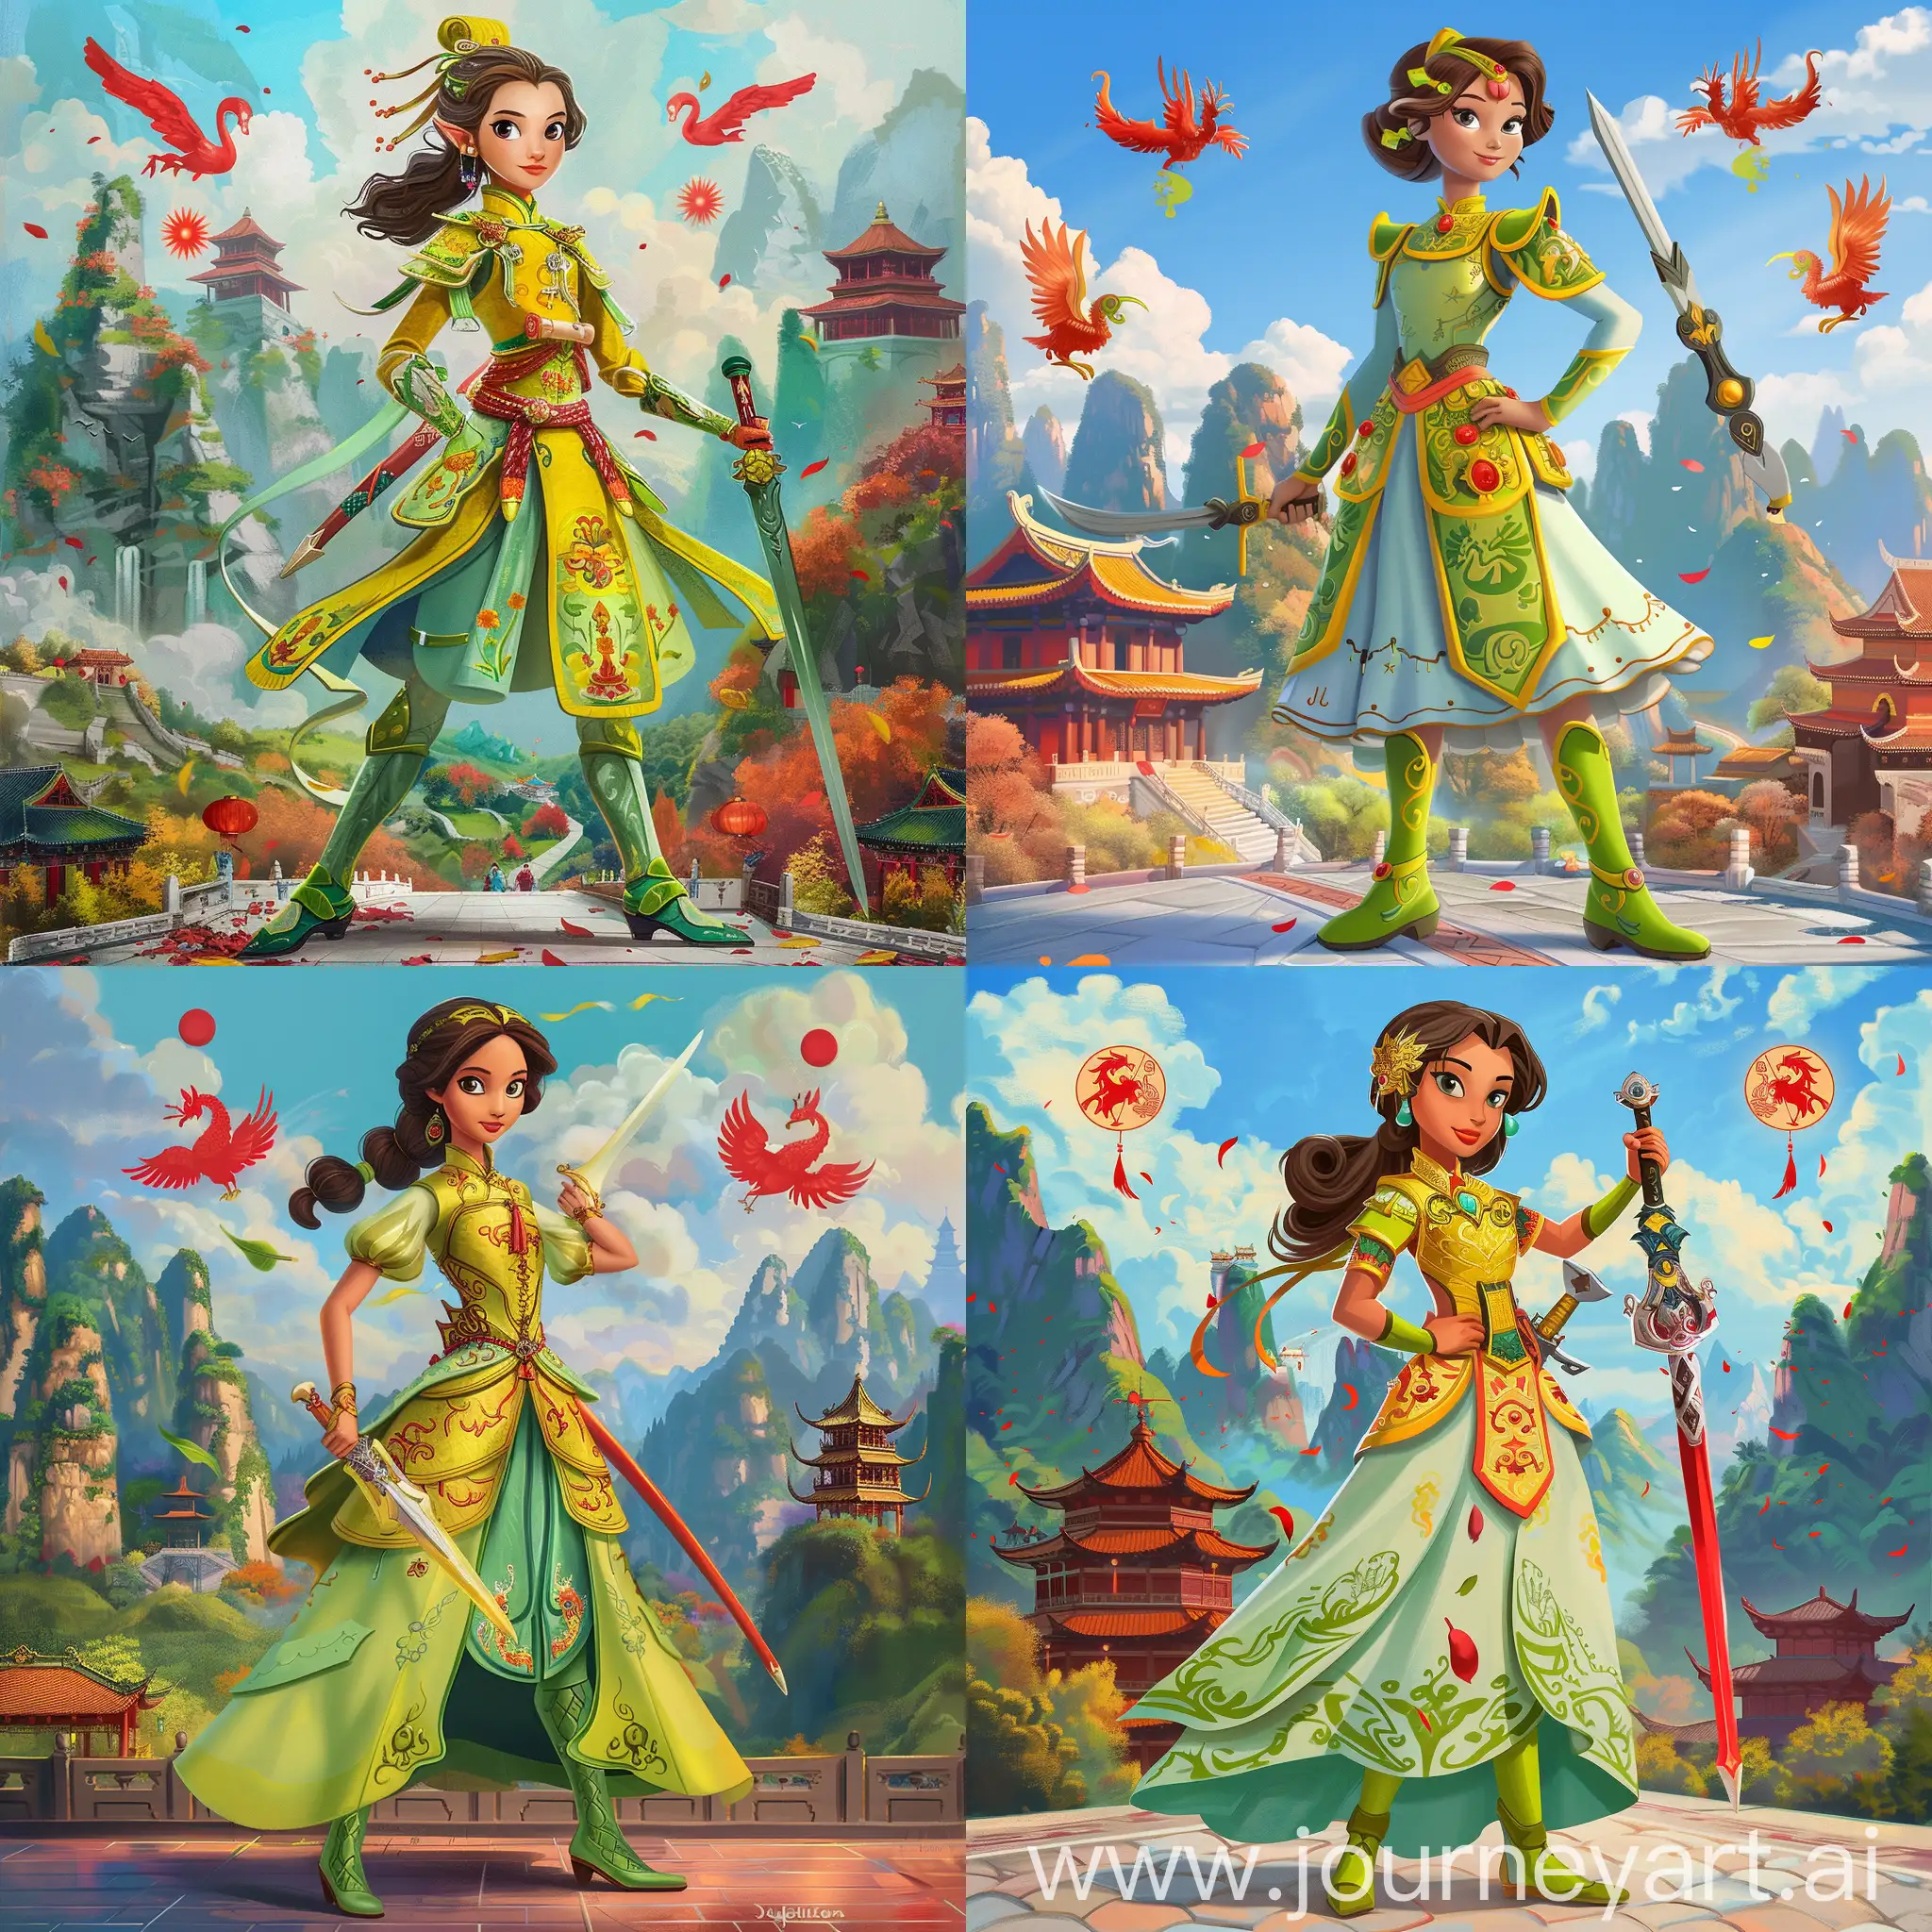 Historic painting style:

a beautiful and elegant Disney British Princess Amber, from Elena of Avalor cartoon, she has yellow brown color Empress Sisi hair style, she has white skin and looks like Princess Sisi, she wears kiwi and lime color Chinese style medieval armor and boots, she holds a Chinese sword in right hand, 

Chinese Guilin mountains and temple as background, red phoenix and three small red suns in blue sky.